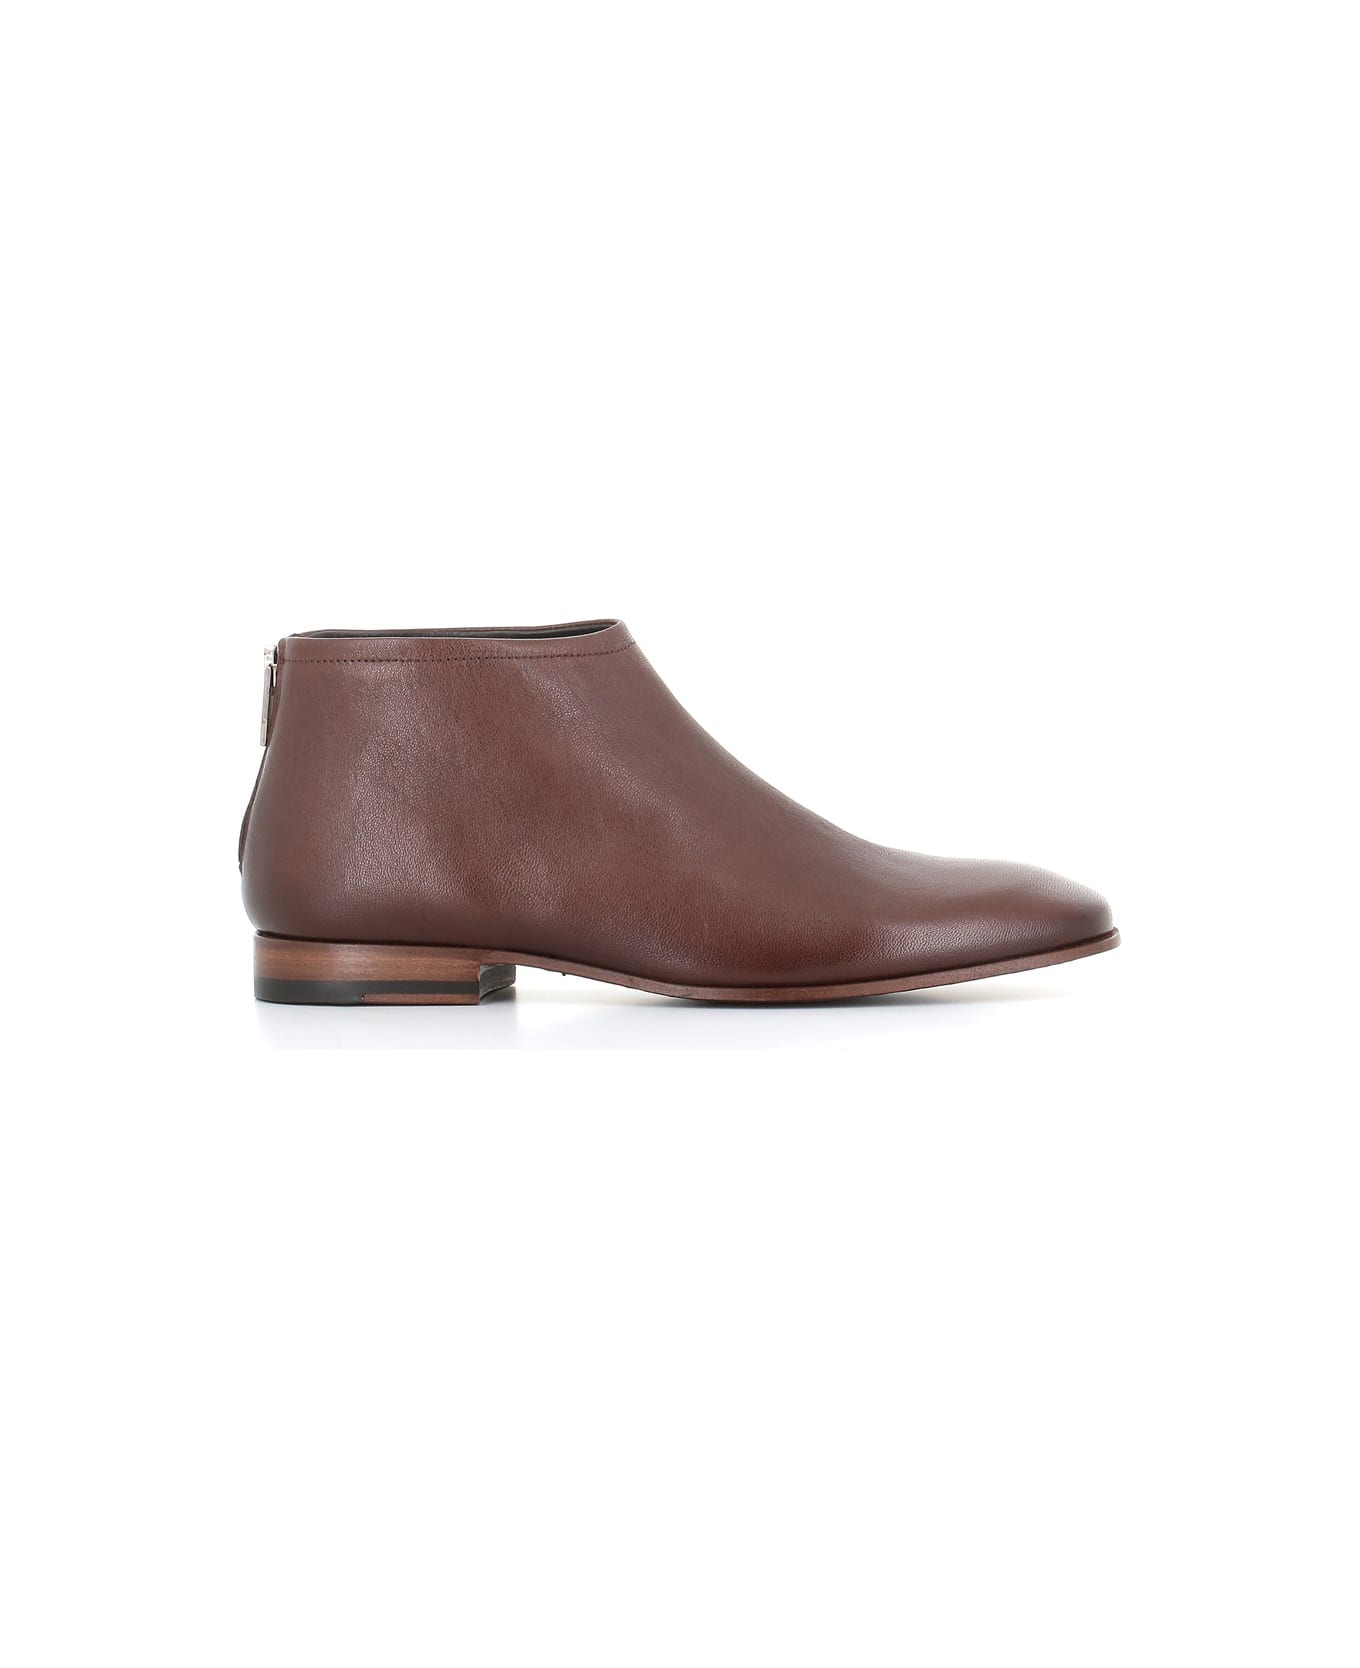 Pantanetti Ankle Boot 17120d - Brown ブーツ